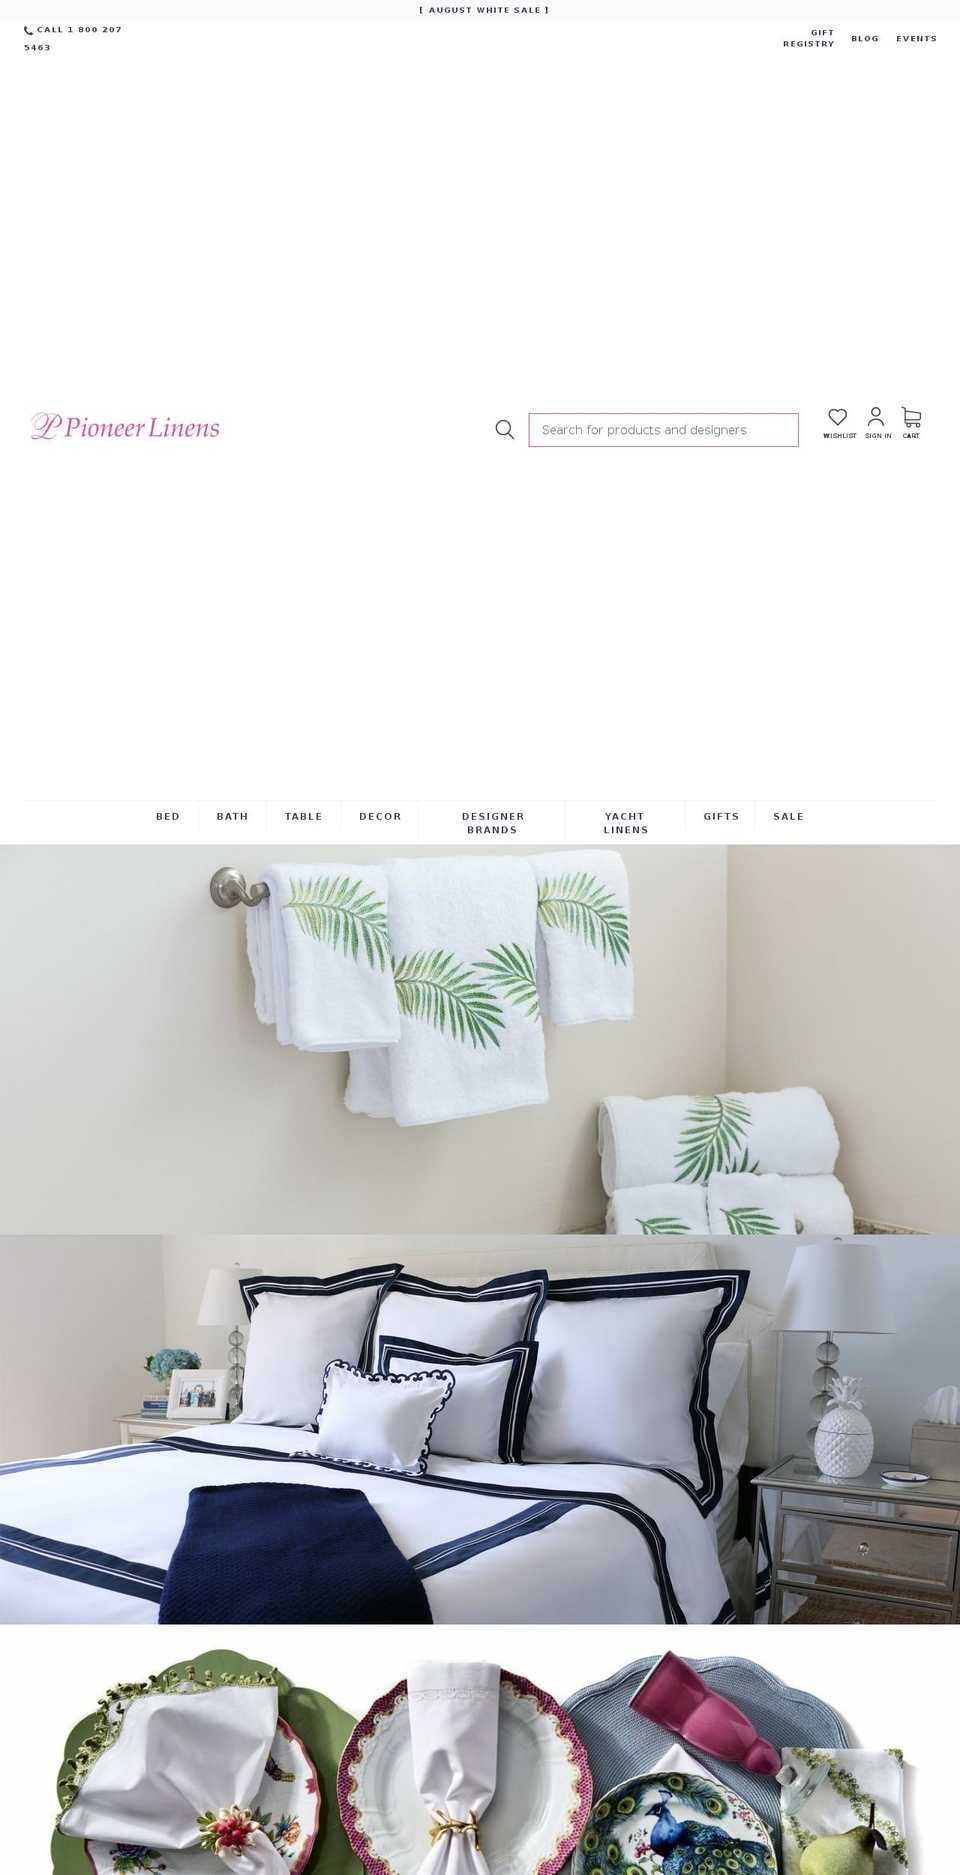 Buko Shopify Theme - Products Consolidation Shopify theme site example plhospitality.com